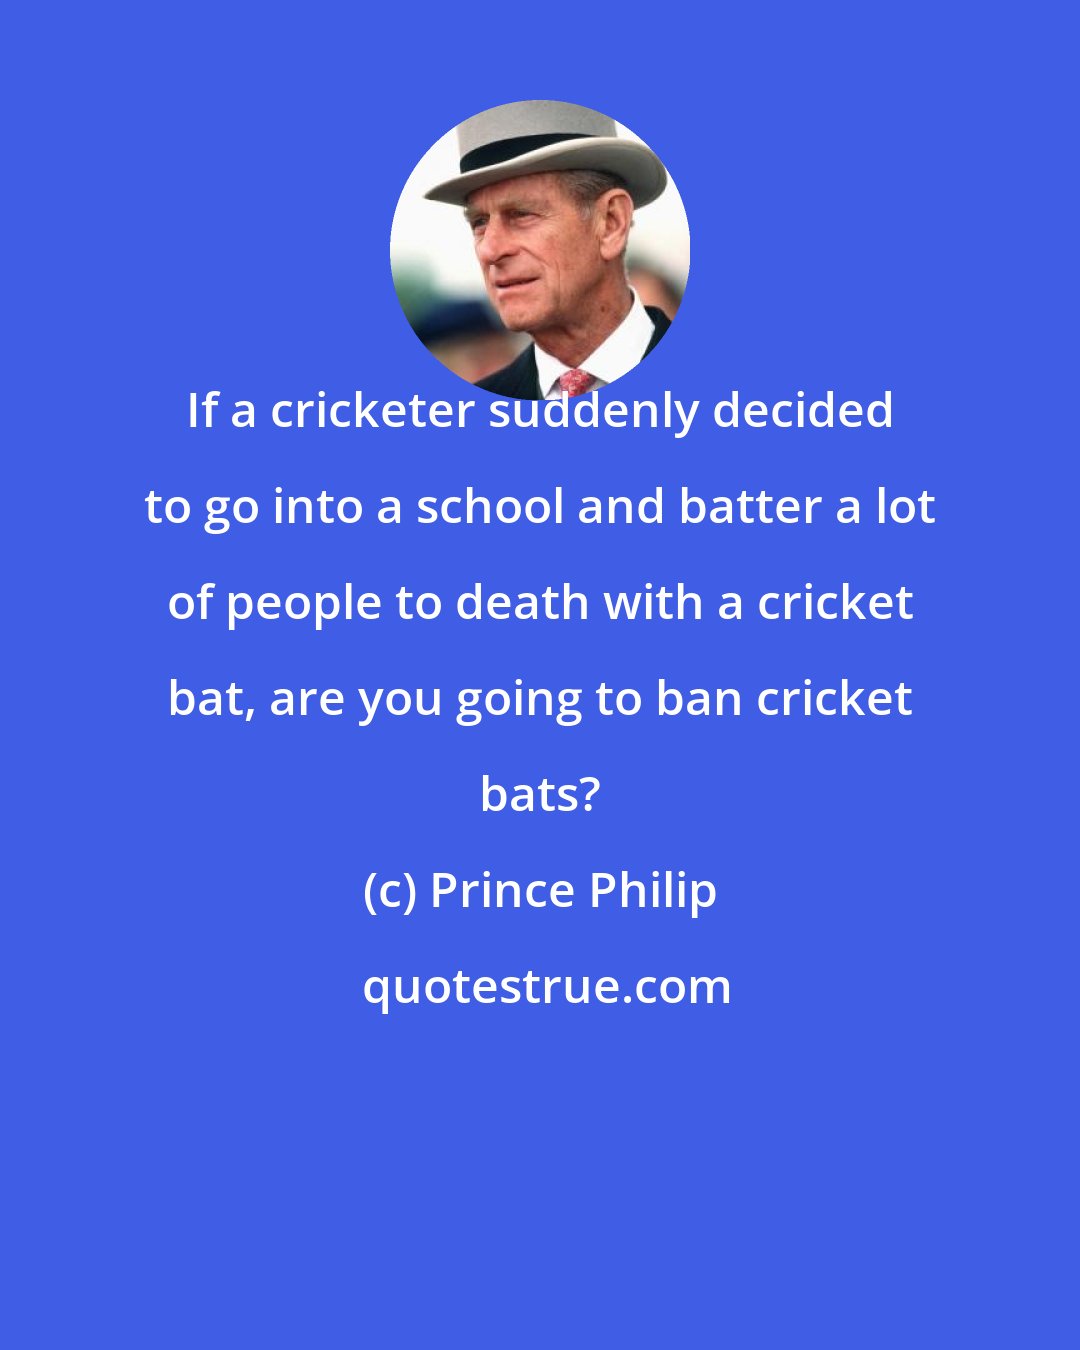 Prince Philip: If a cricketer suddenly decided to go into a school and batter a lot of people to death with a cricket bat, are you going to ban cricket bats?